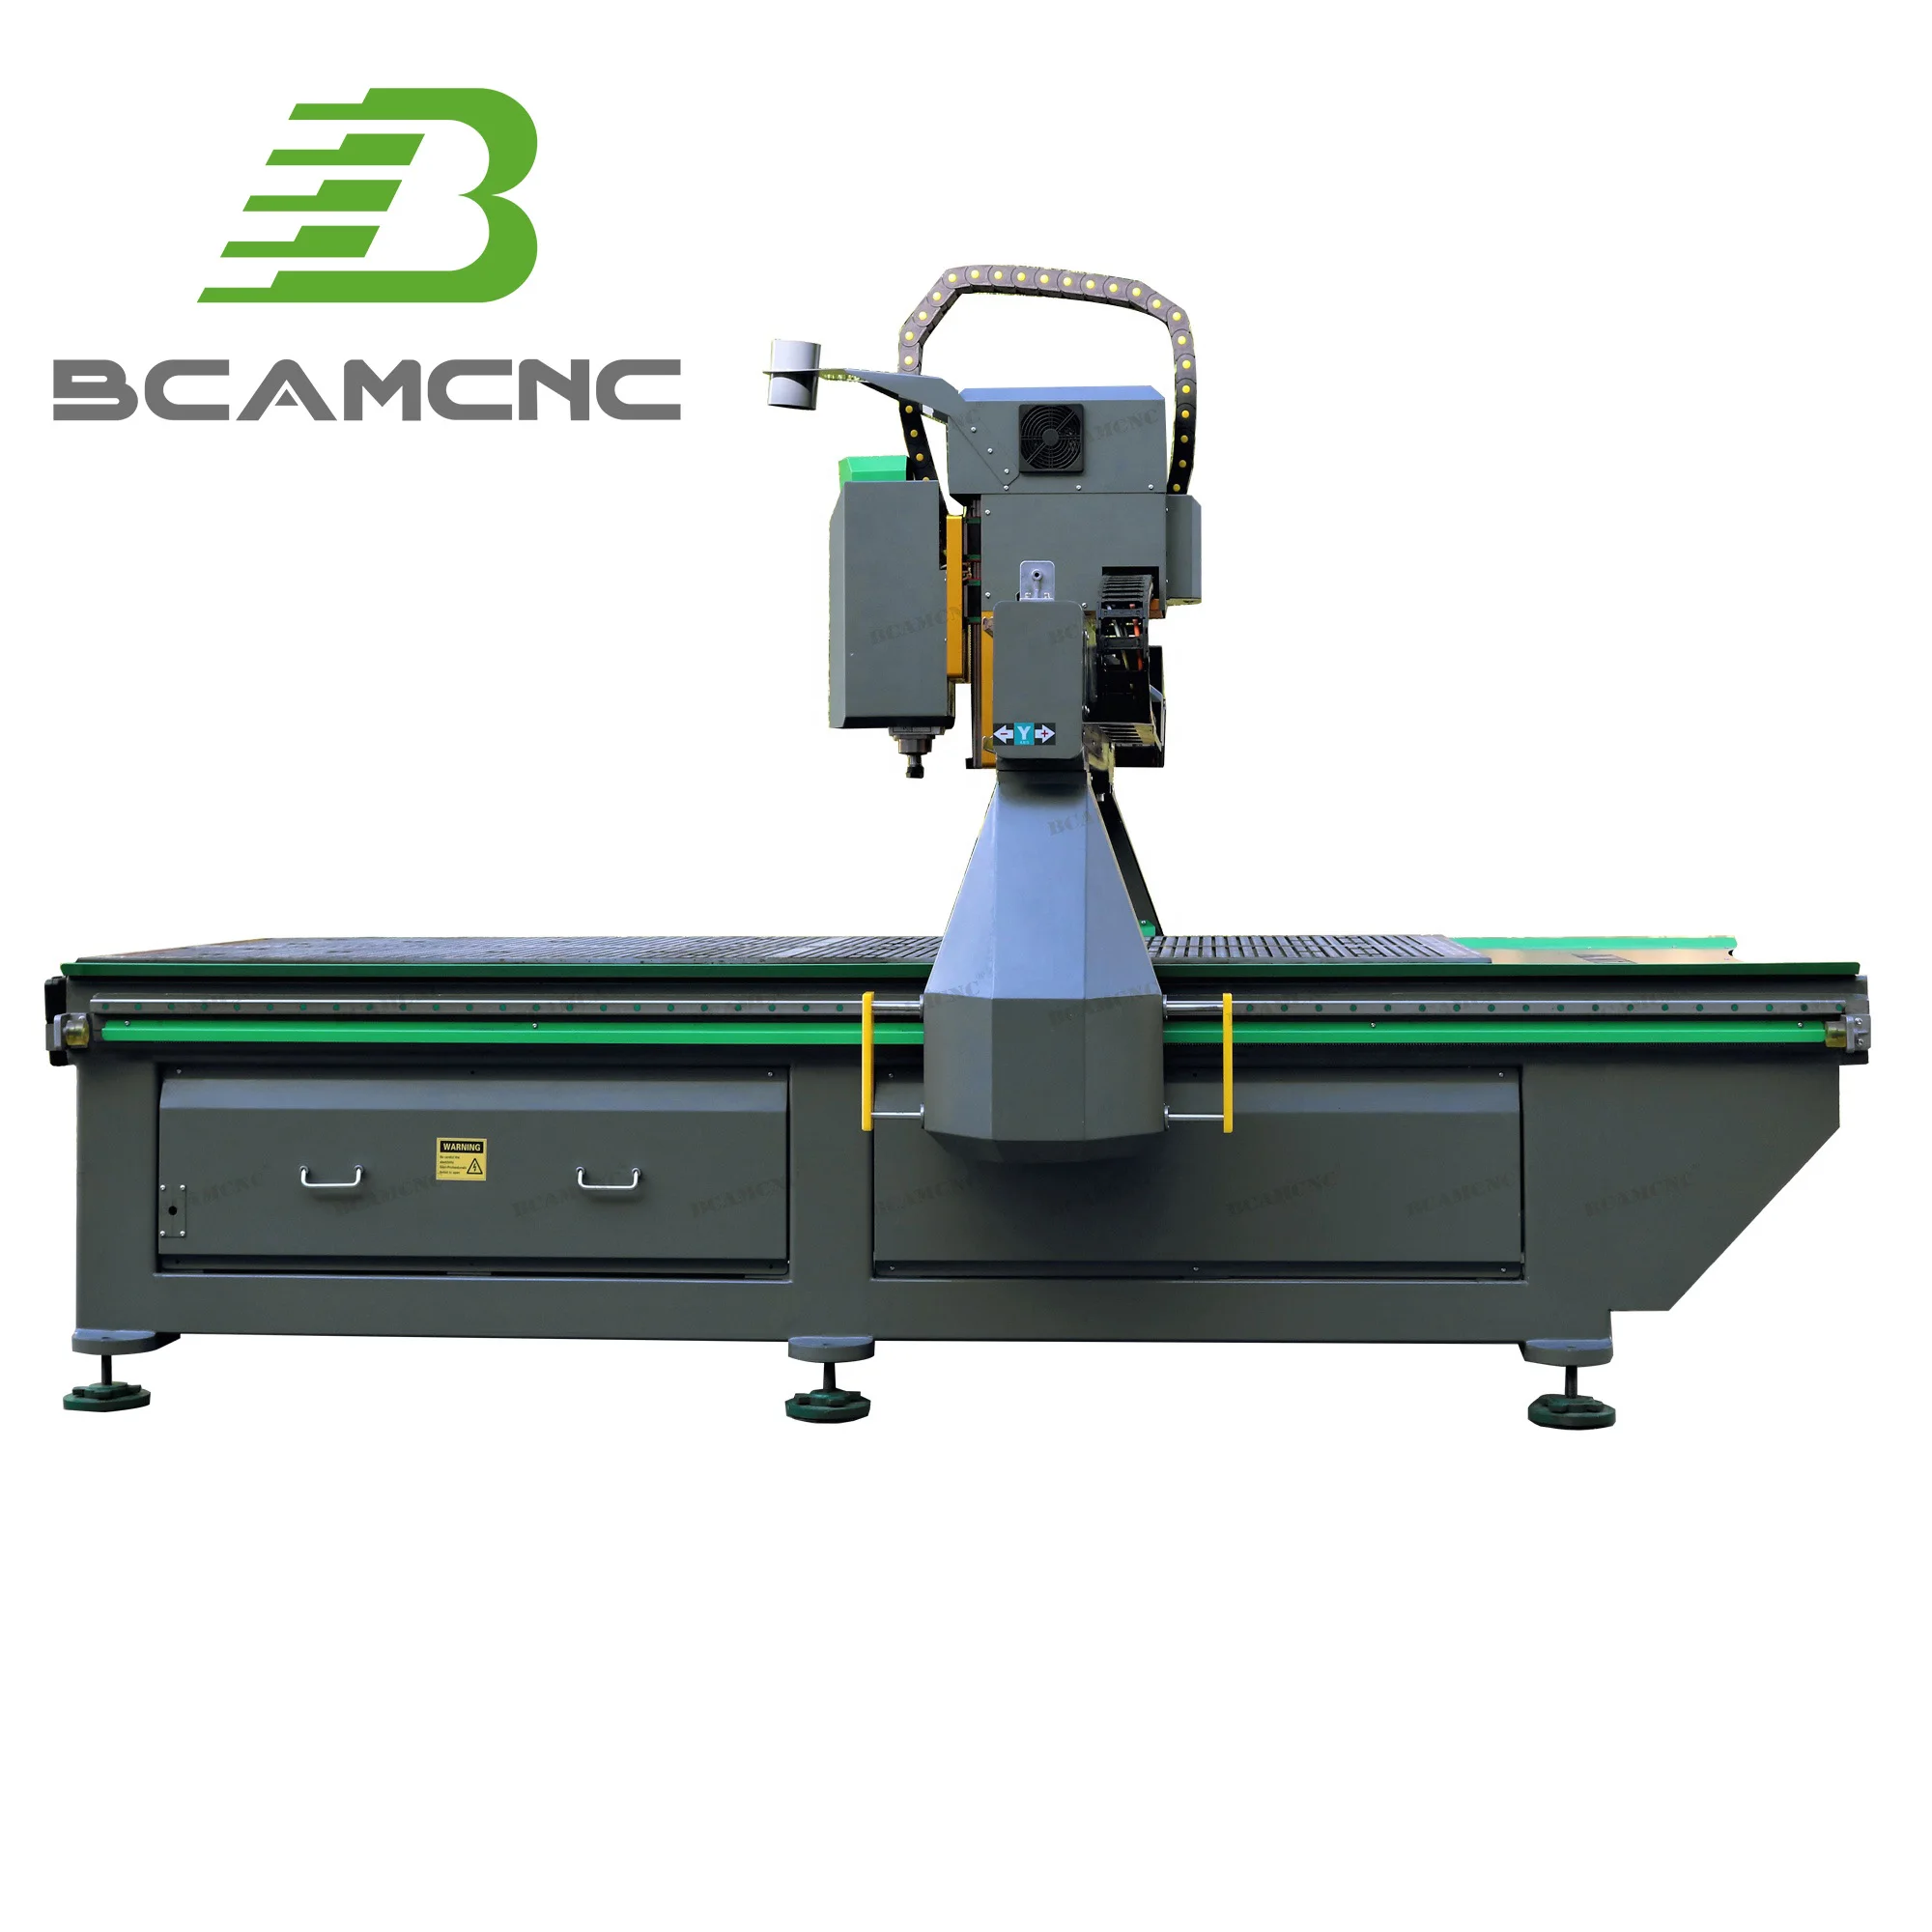 4×8 vacuum table for cnc route advertising cutting machine